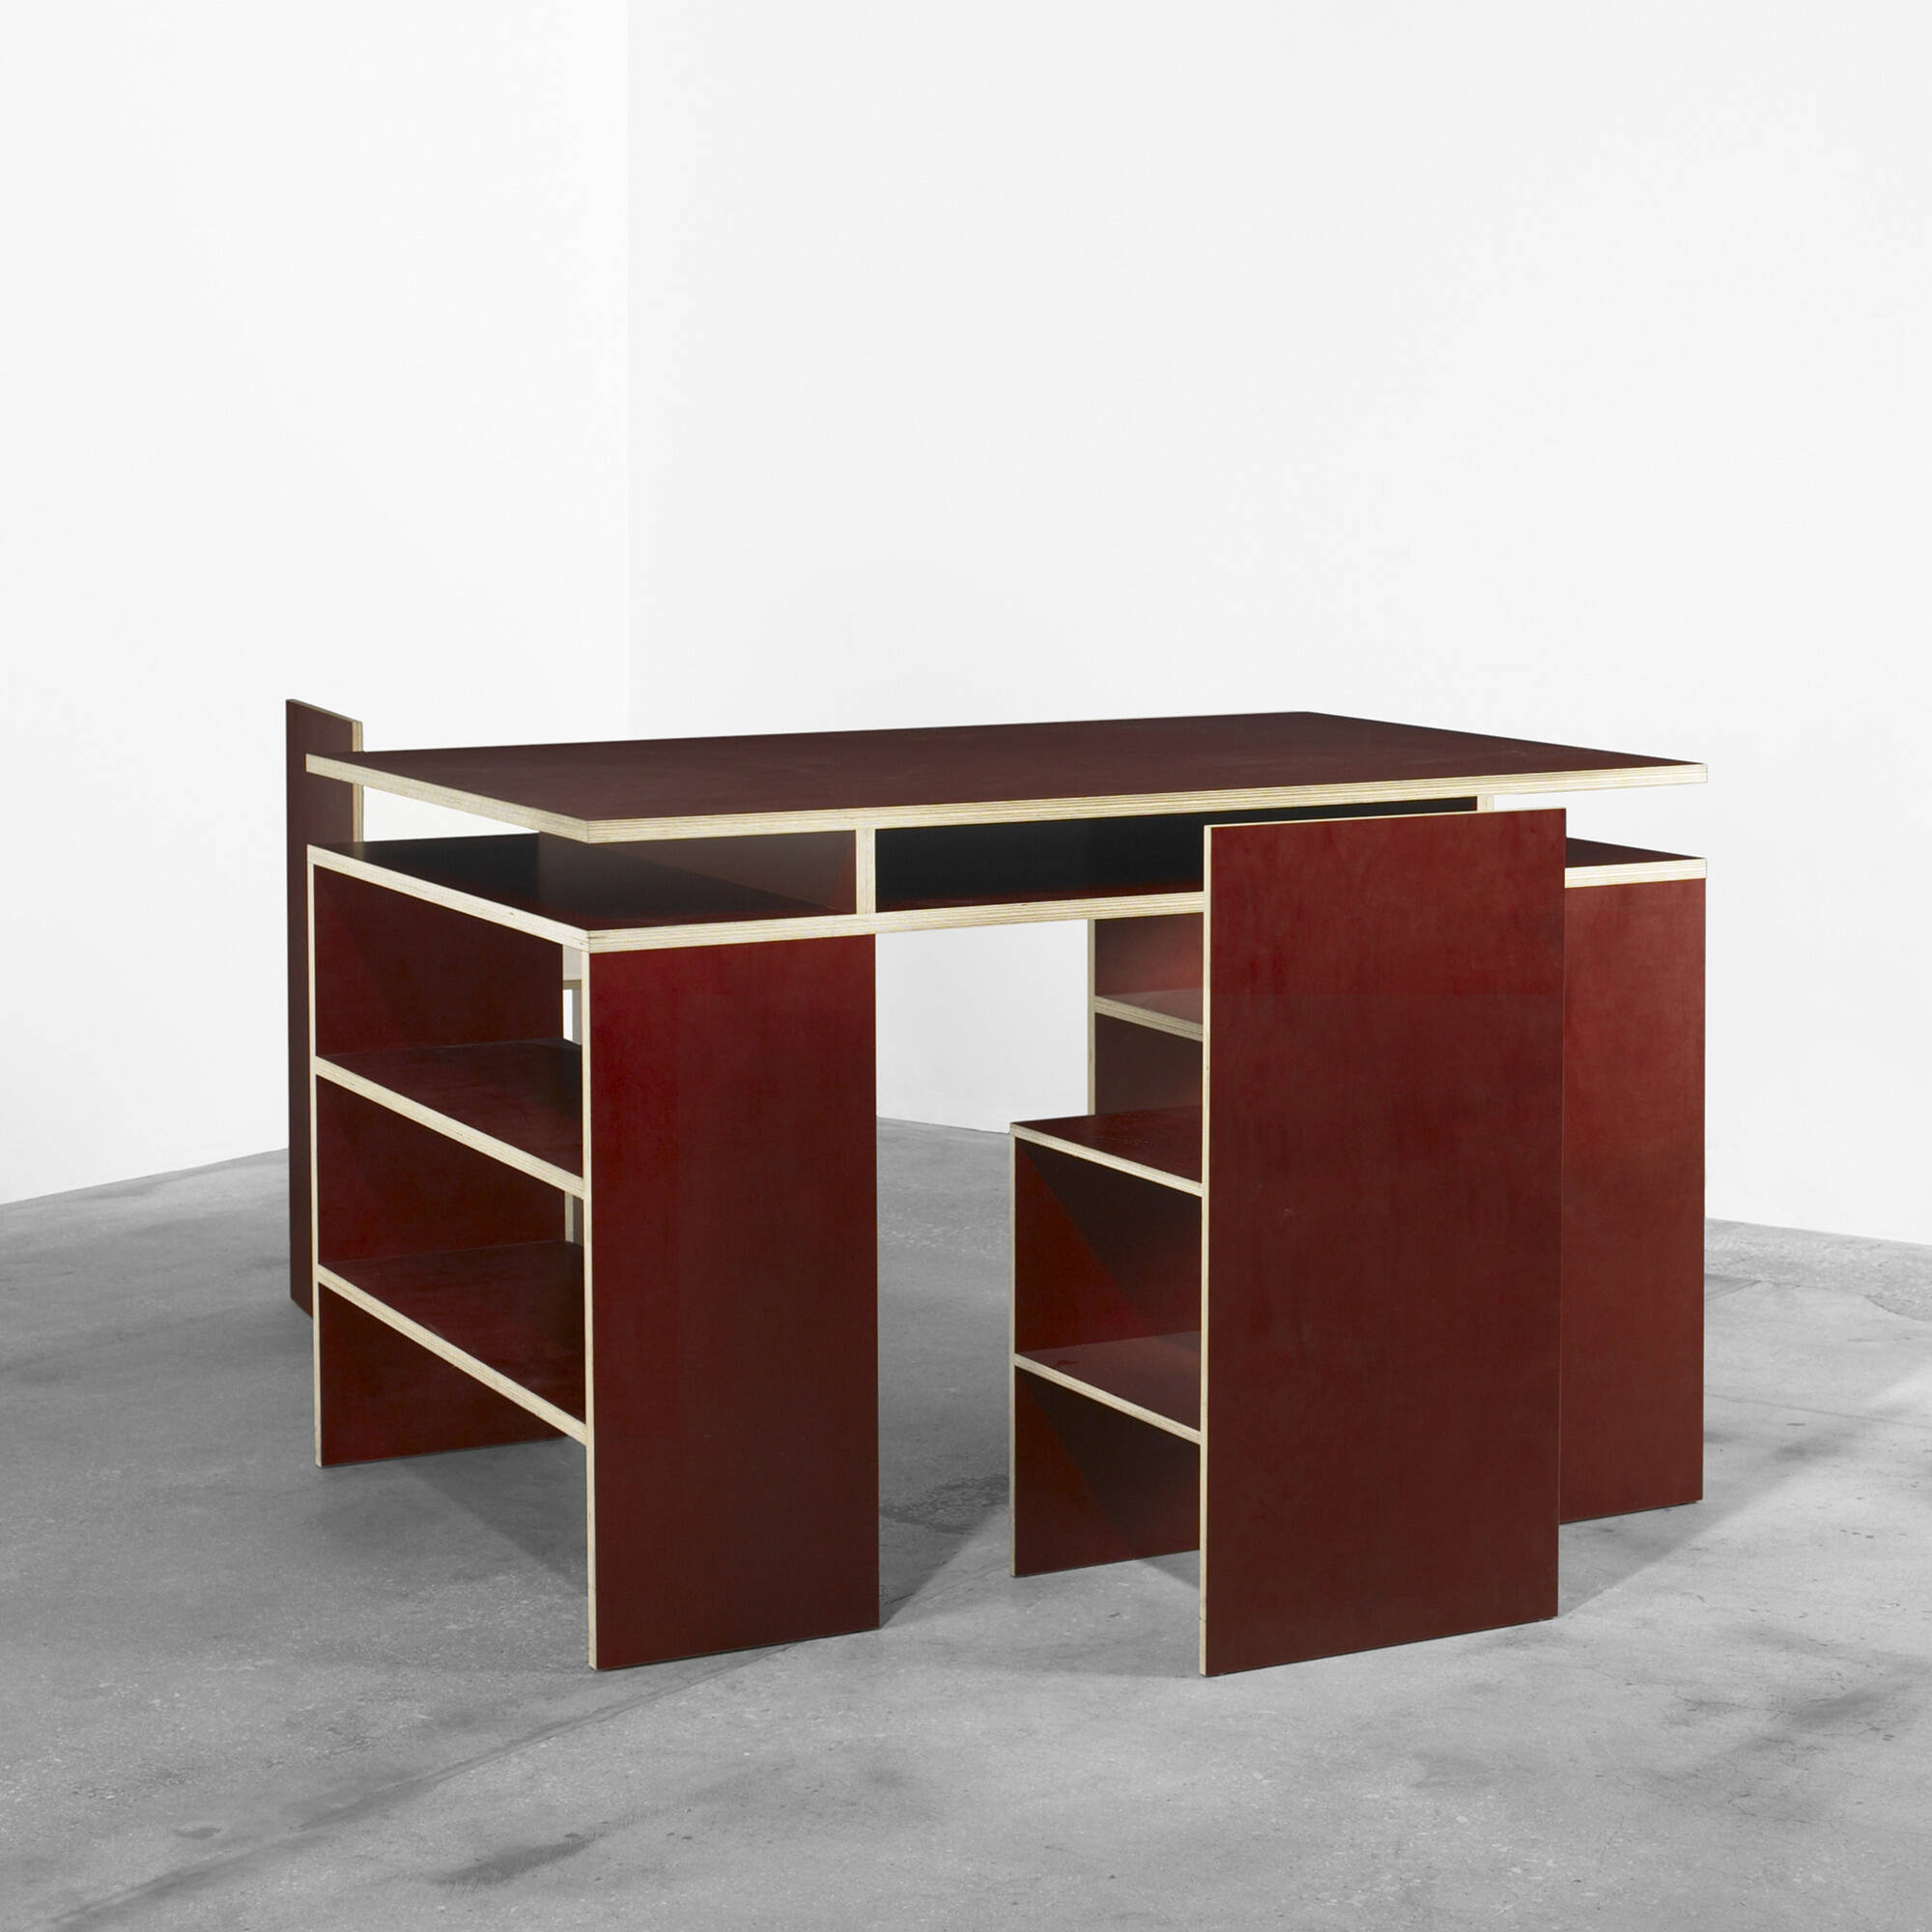 206 Donald Judd Desk And Two Chairs Modern Design 12 October